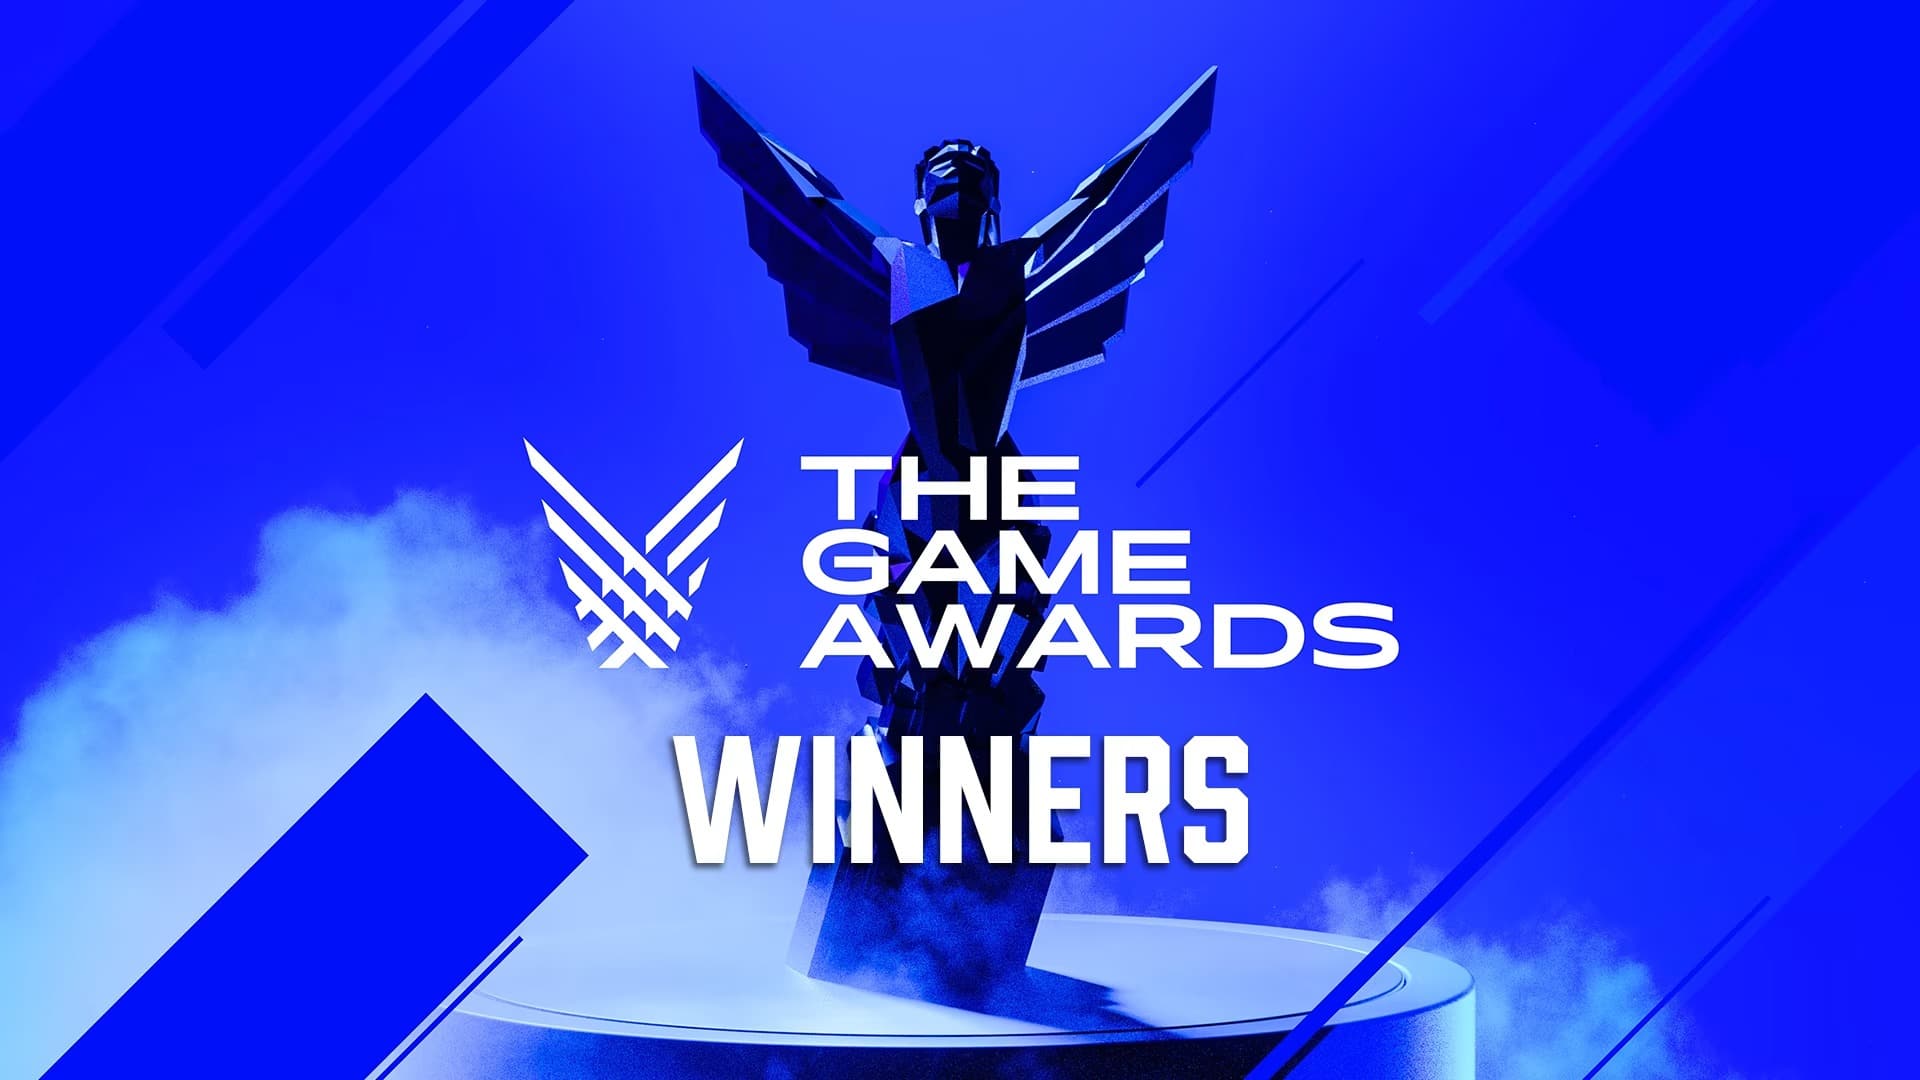 The Game Awards 2021 winners